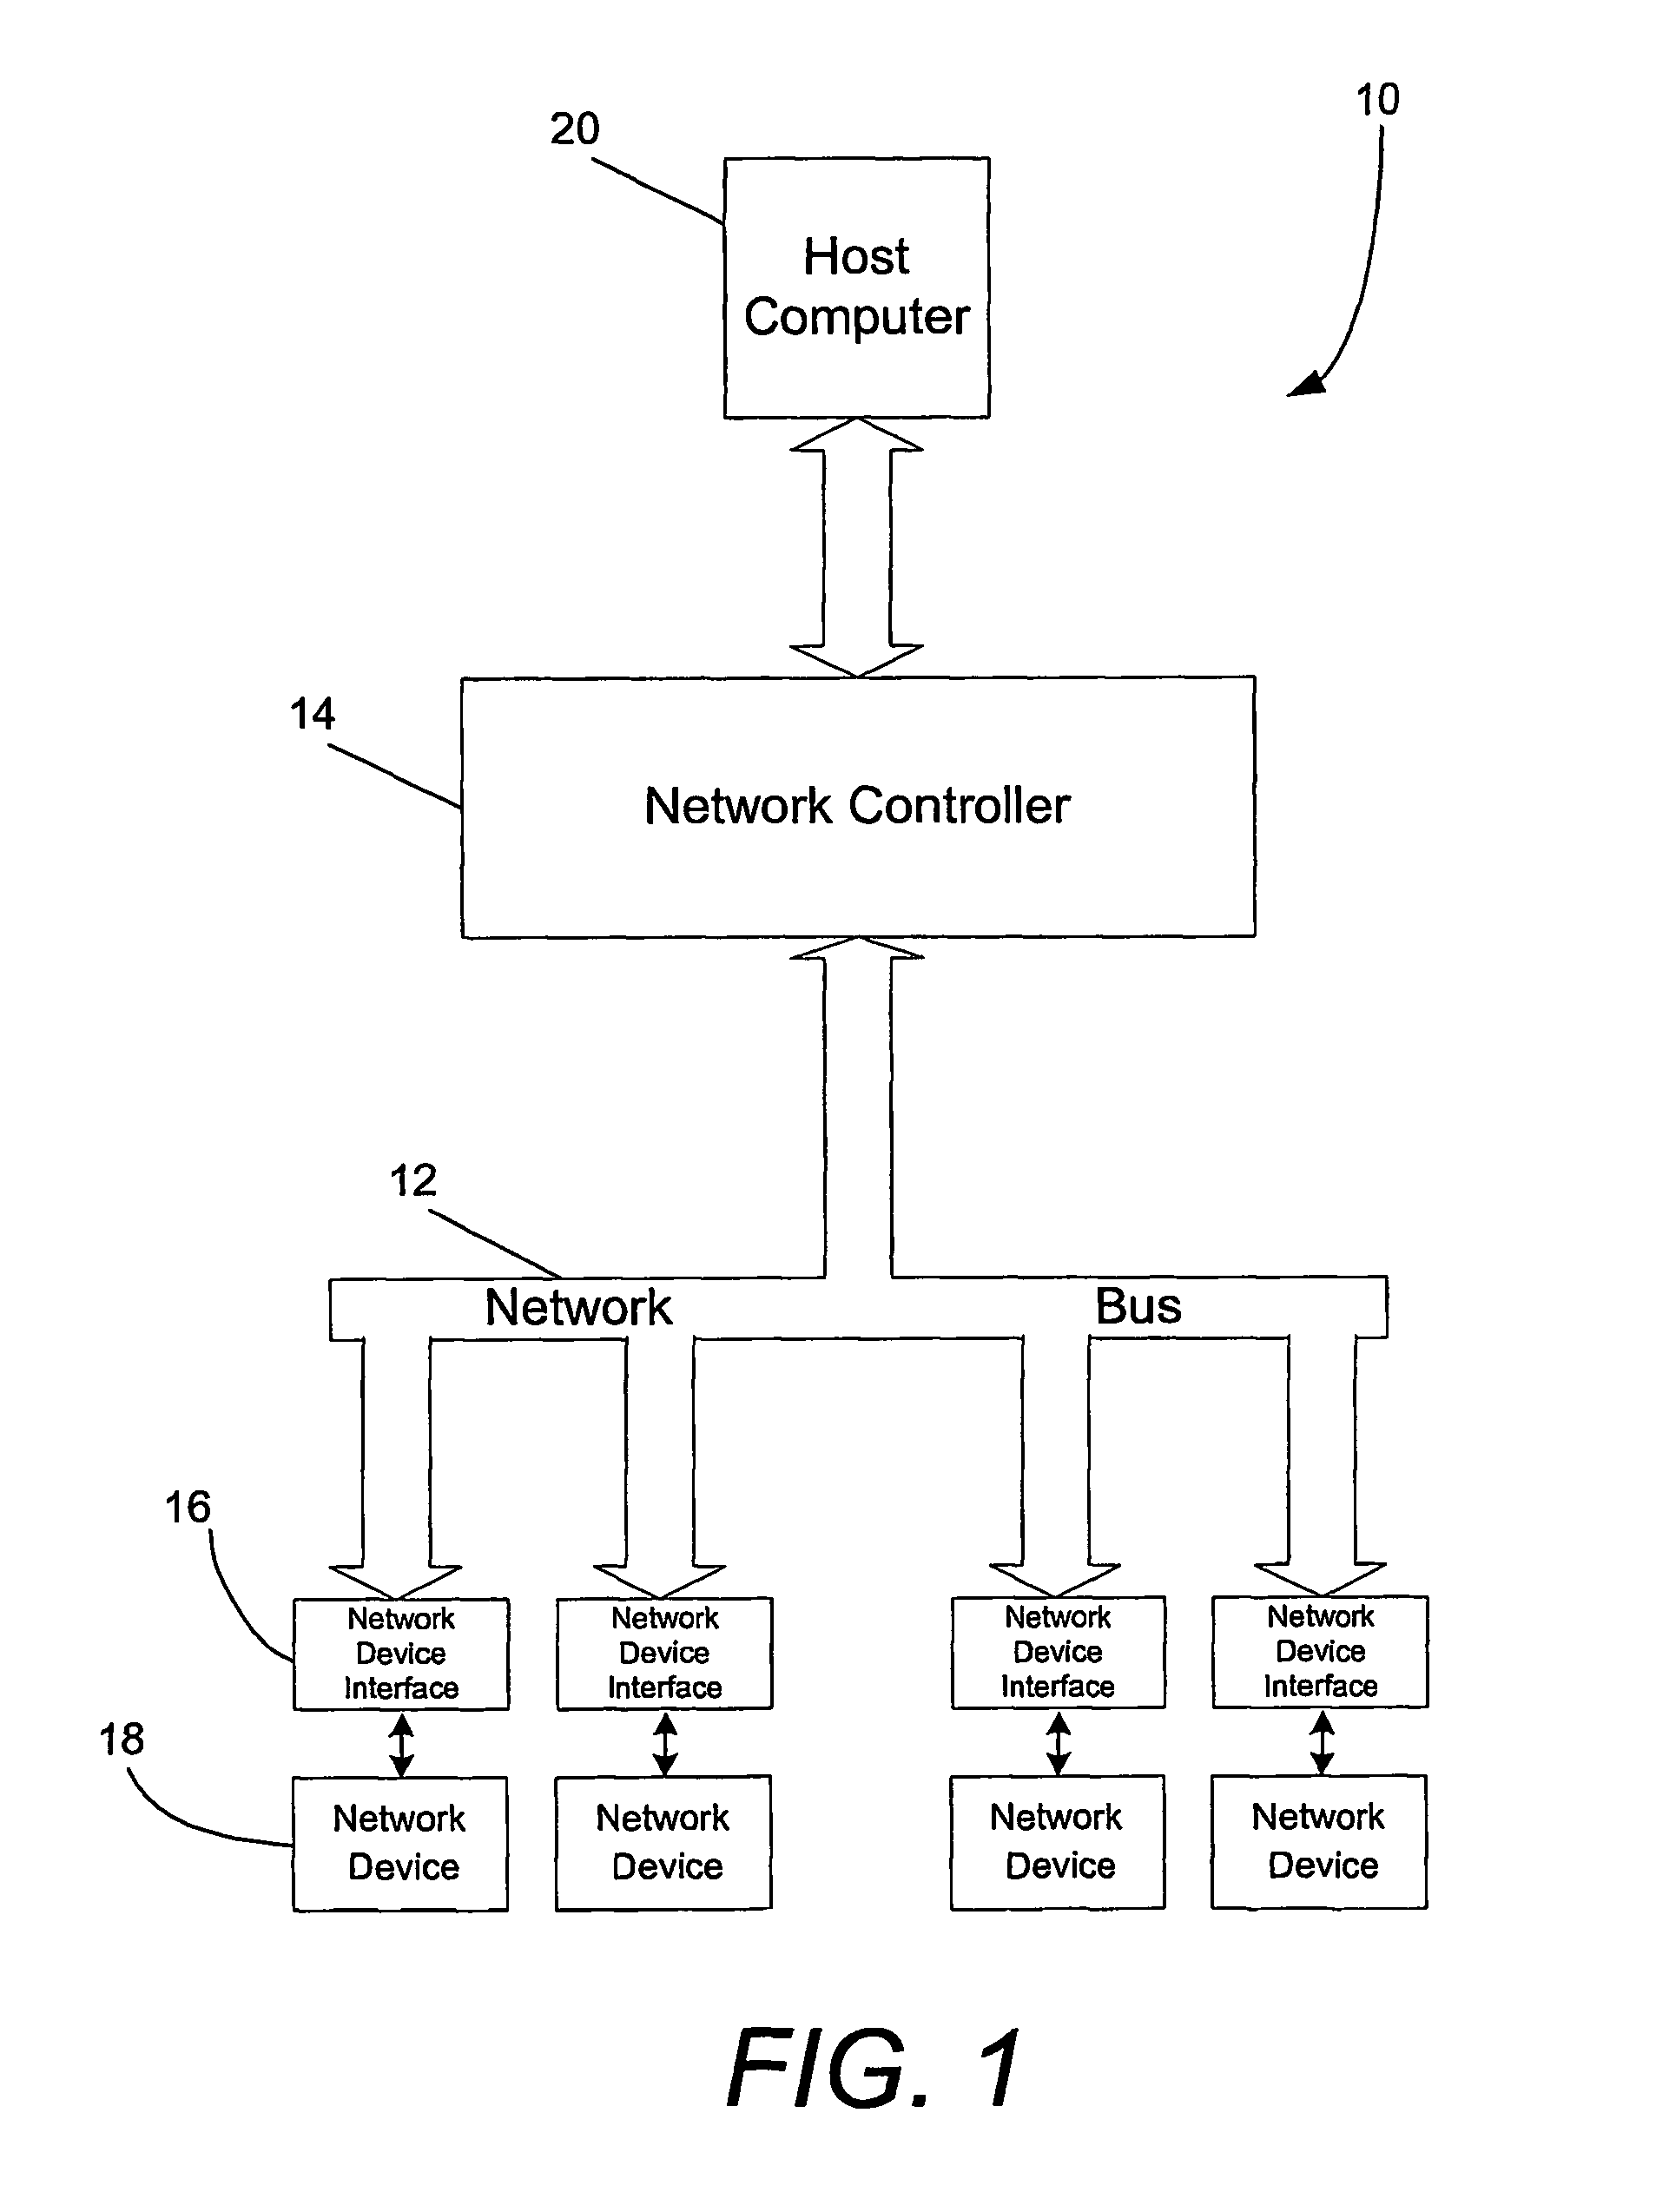 System and method for maintaining proper termination and error-free communication in a network bus